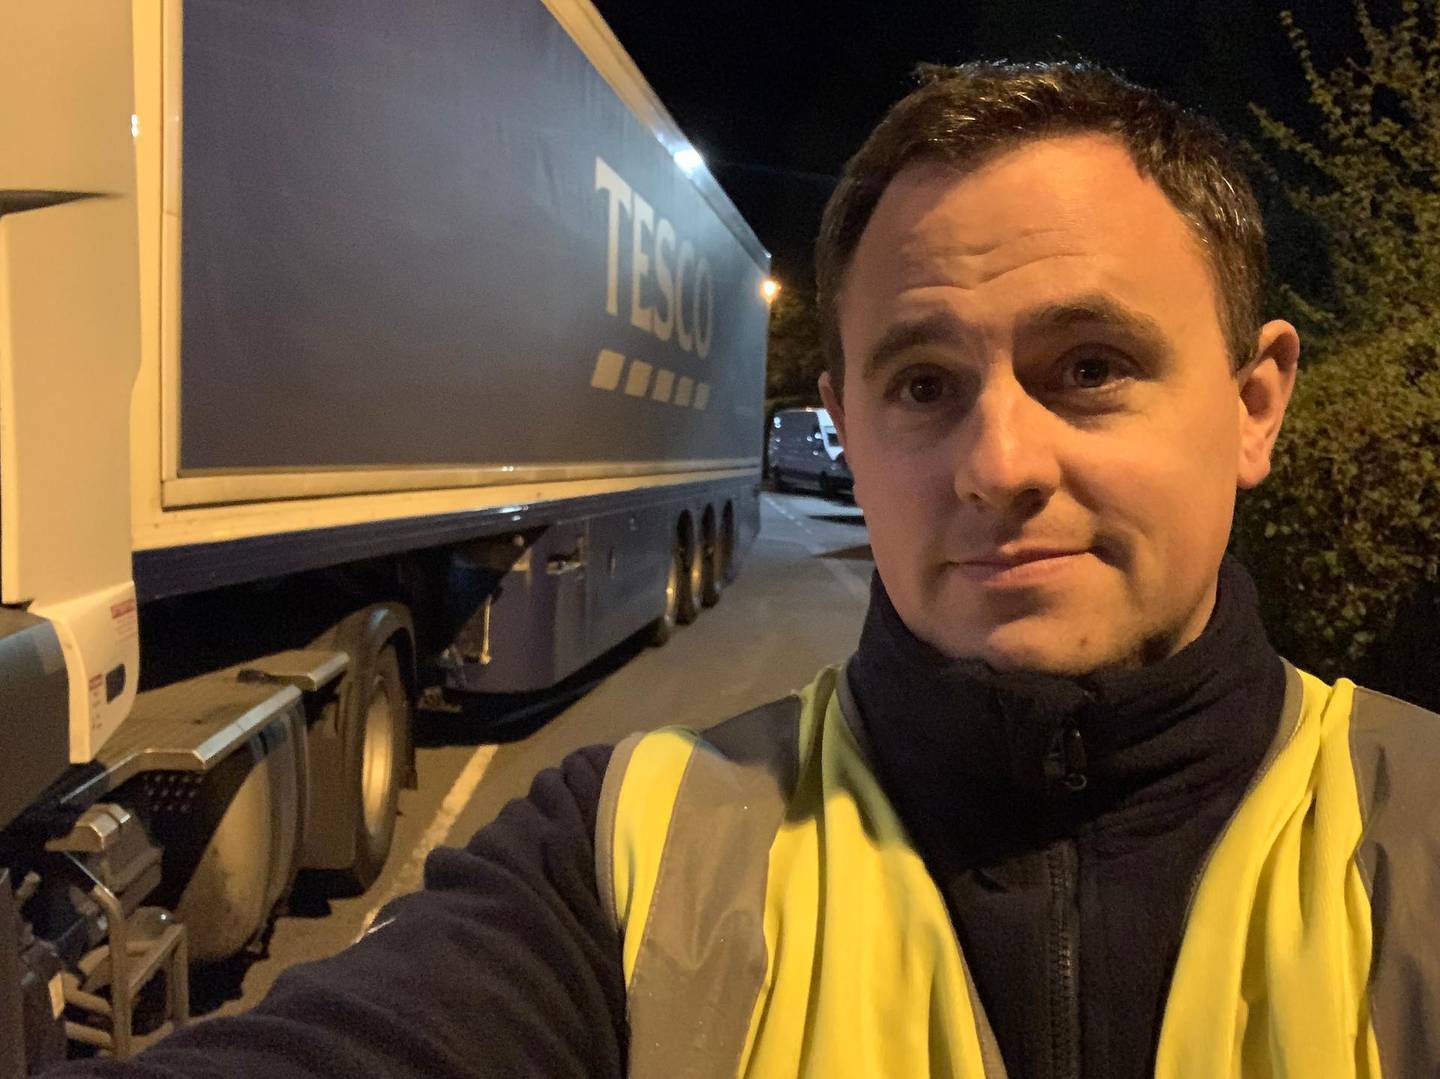 Aaron Leventhal who lost his job at FlyBe and is now working as a truck driver delivering supplies in the coronavirus outbreak.